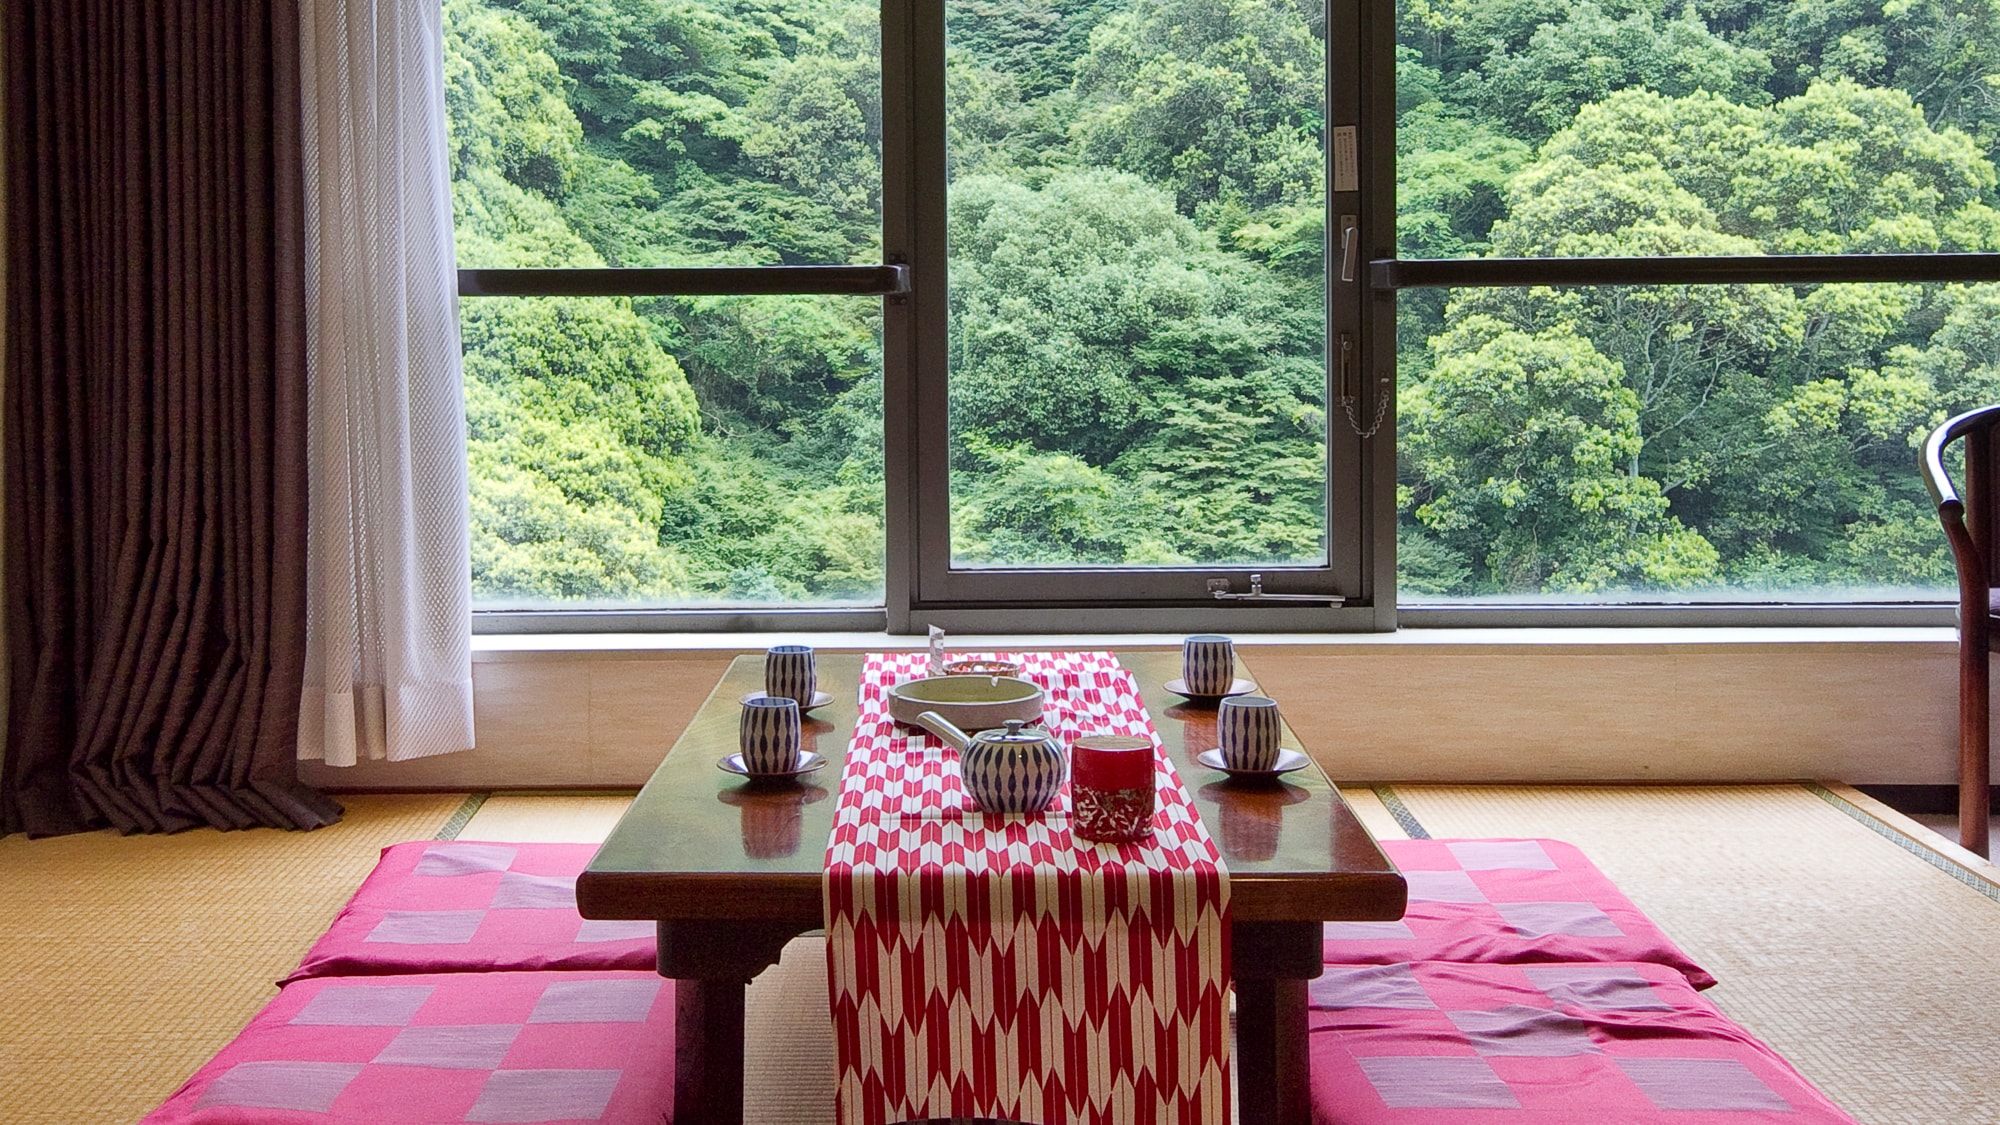 [Japanese-style room] Beautiful nature decorates the windowsill. We will provide you with a relaxing time.